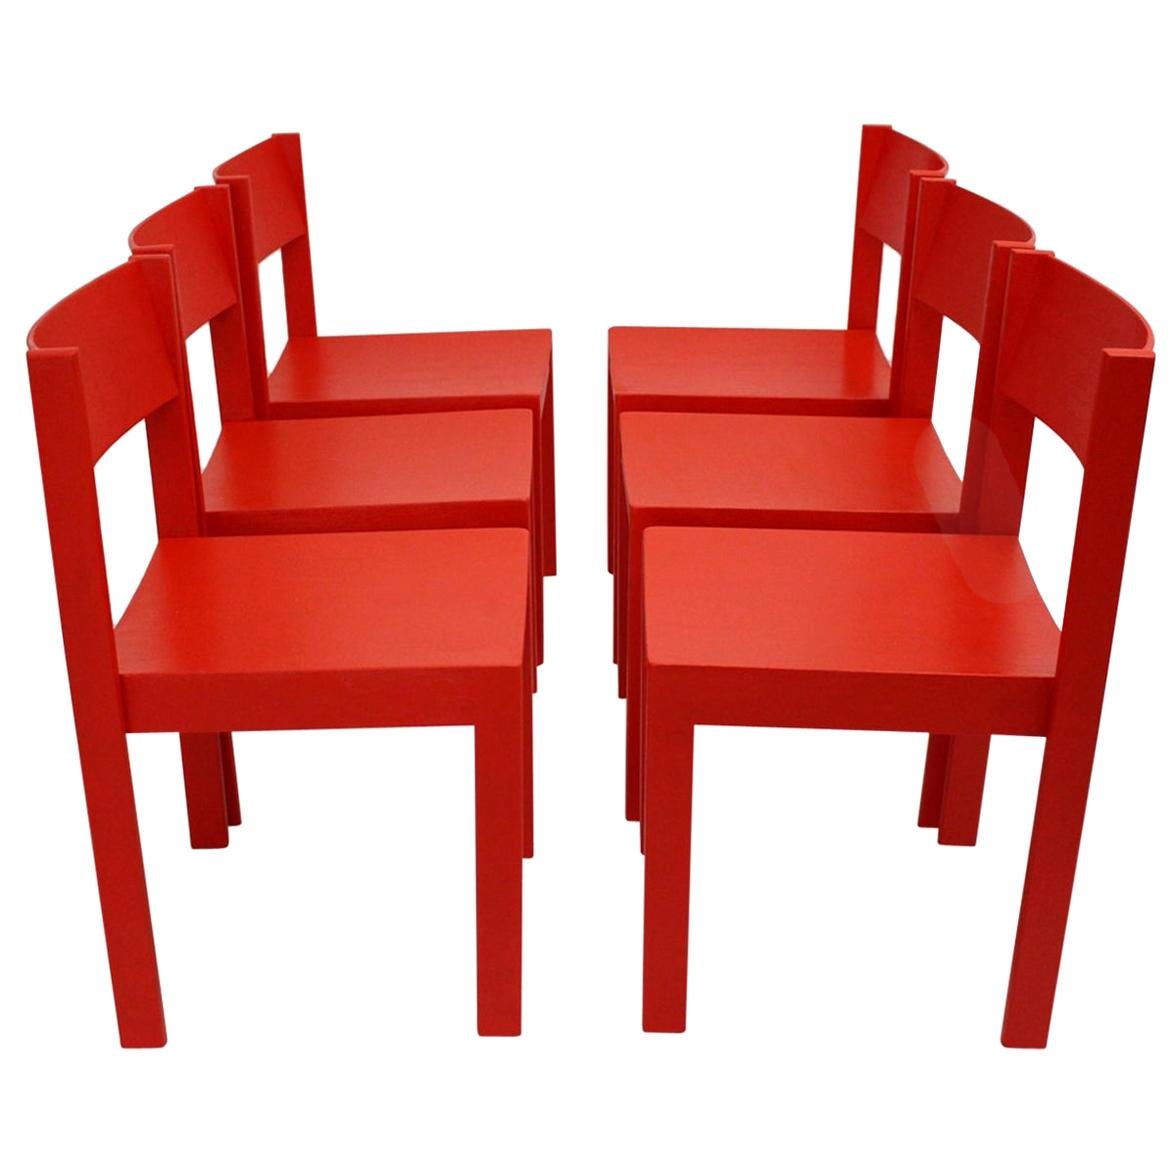 Mid-Century Modern Red Carl Auböck Dining Room Chairs, 1956, Vienna Set of Six